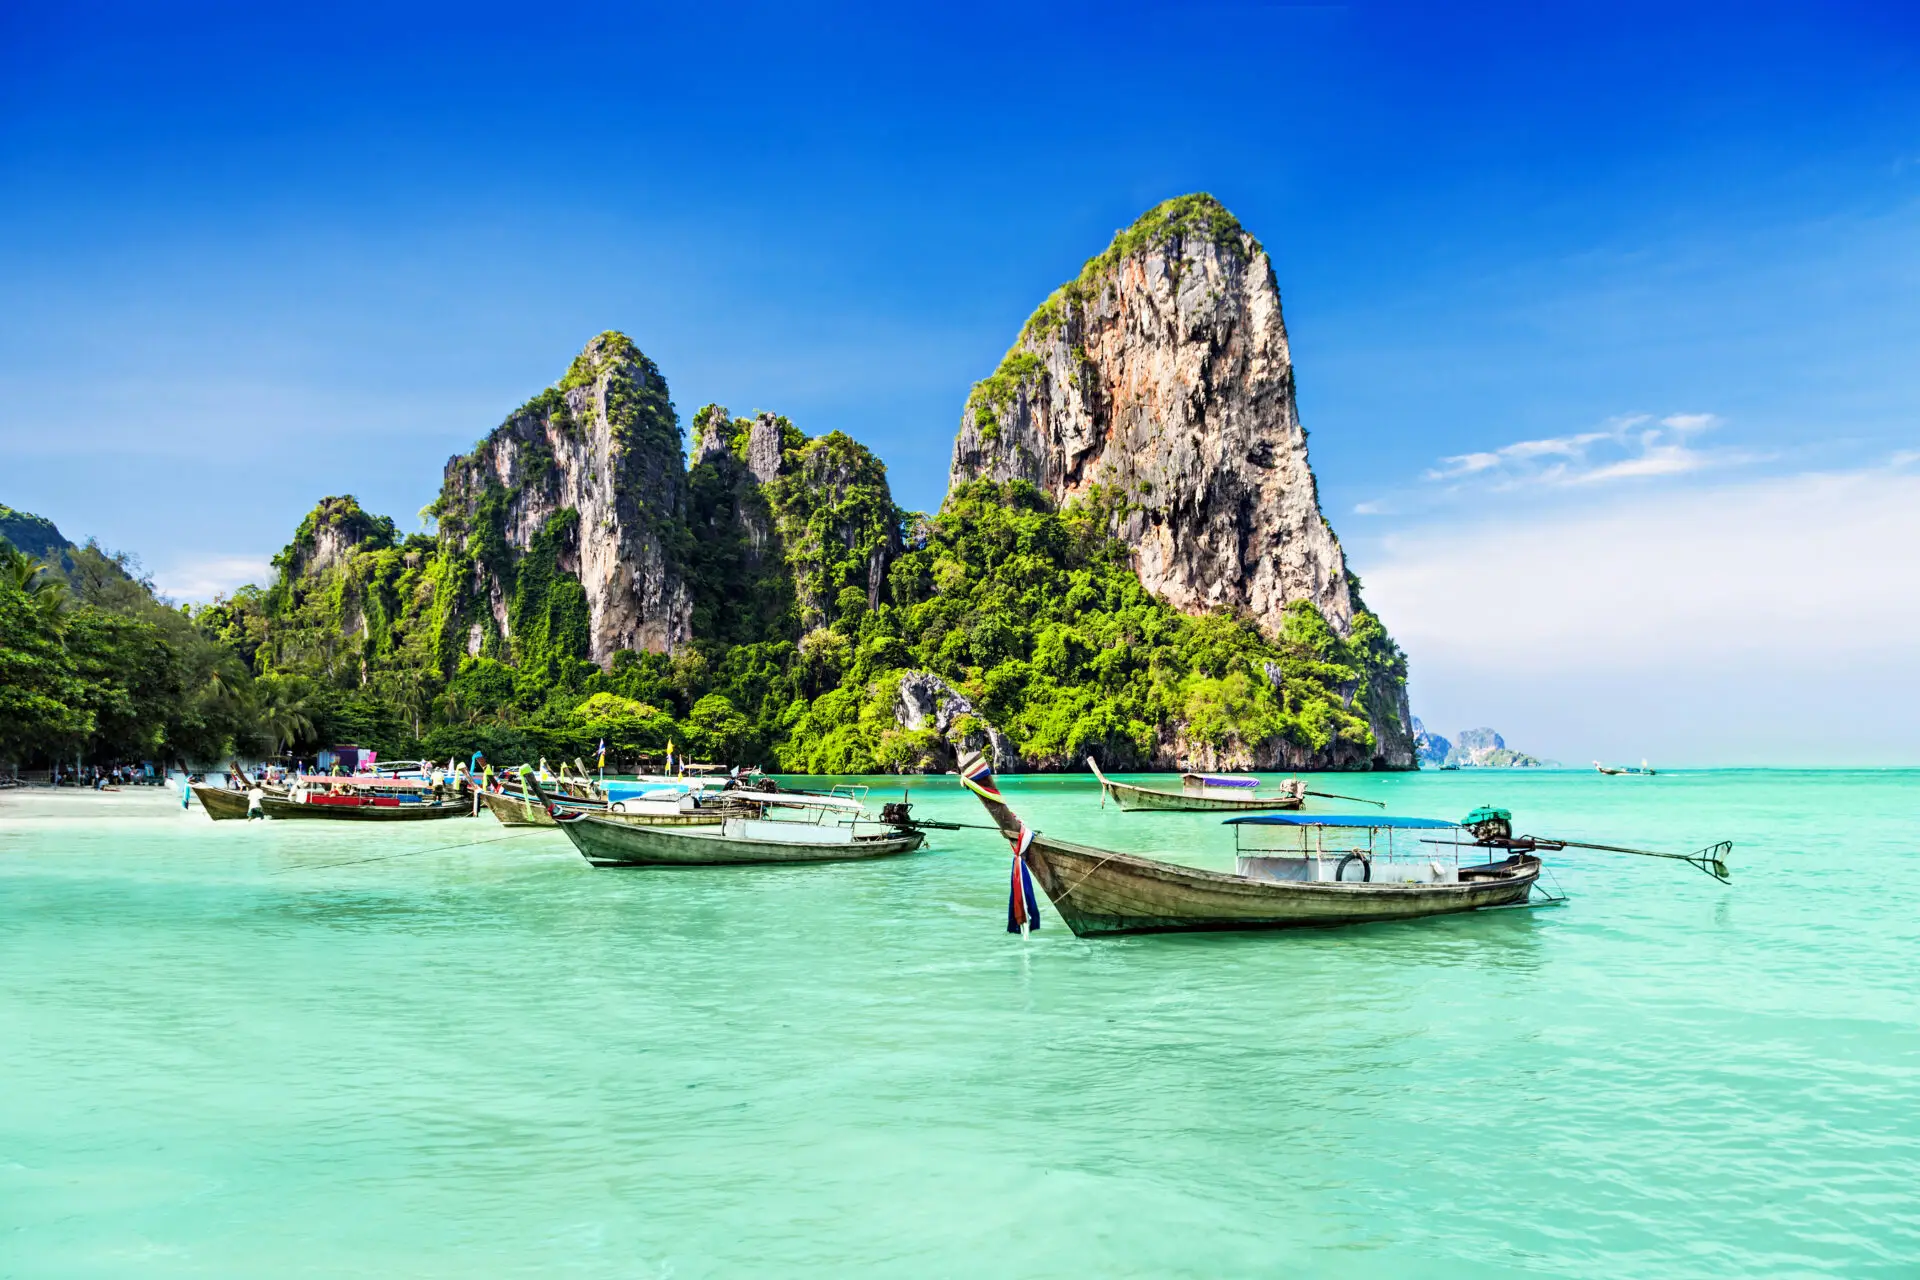 Beautiful turquoise water with traditional boats in Thailand